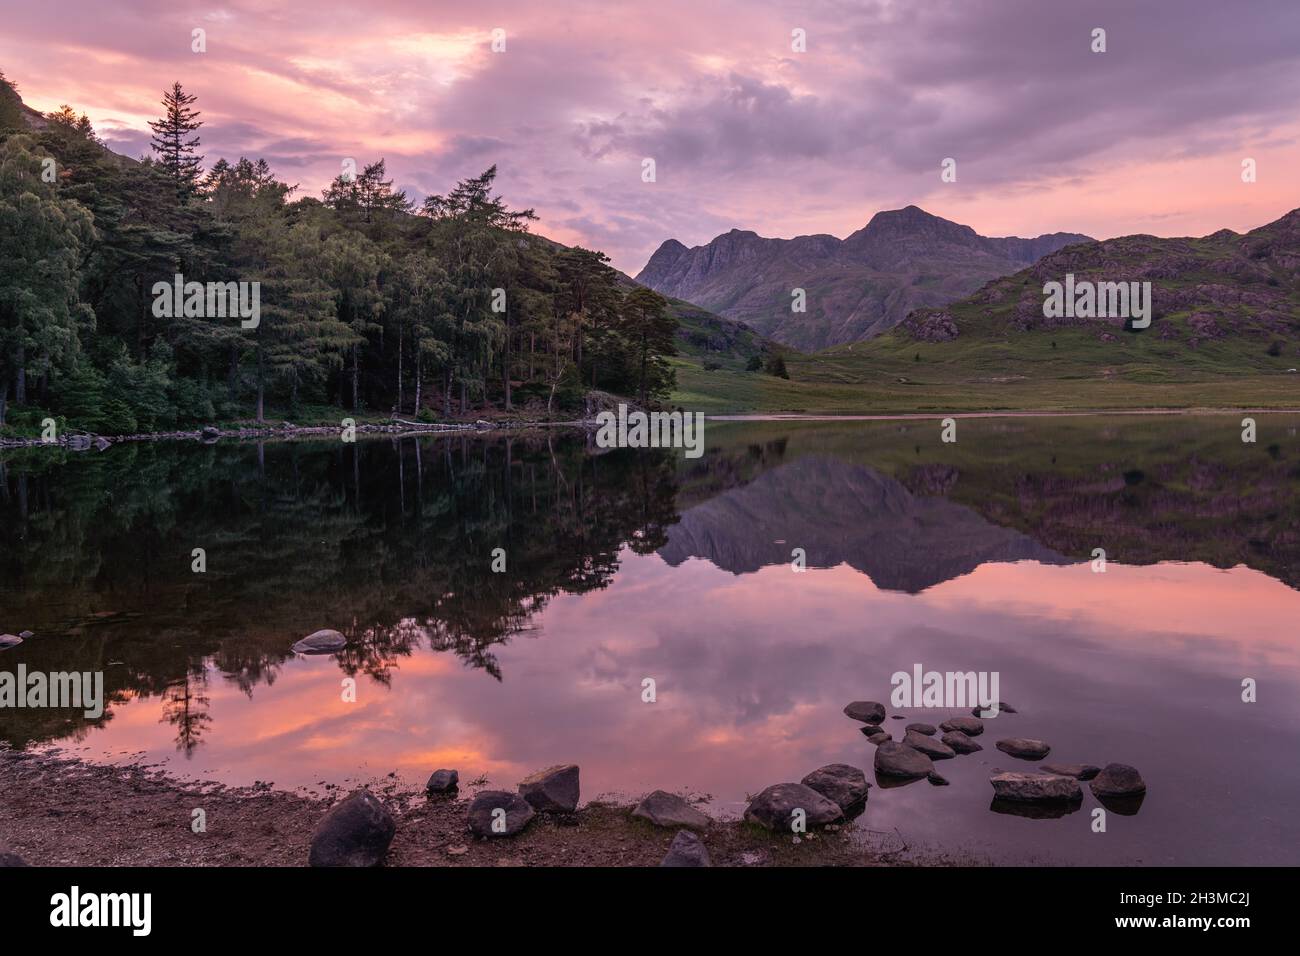 Sunset from Blea Tarn in the Lake District National Park, UK England.  The Langdale Pikes form the mountain backdrop and the sky reflection in the wat Stock Photo